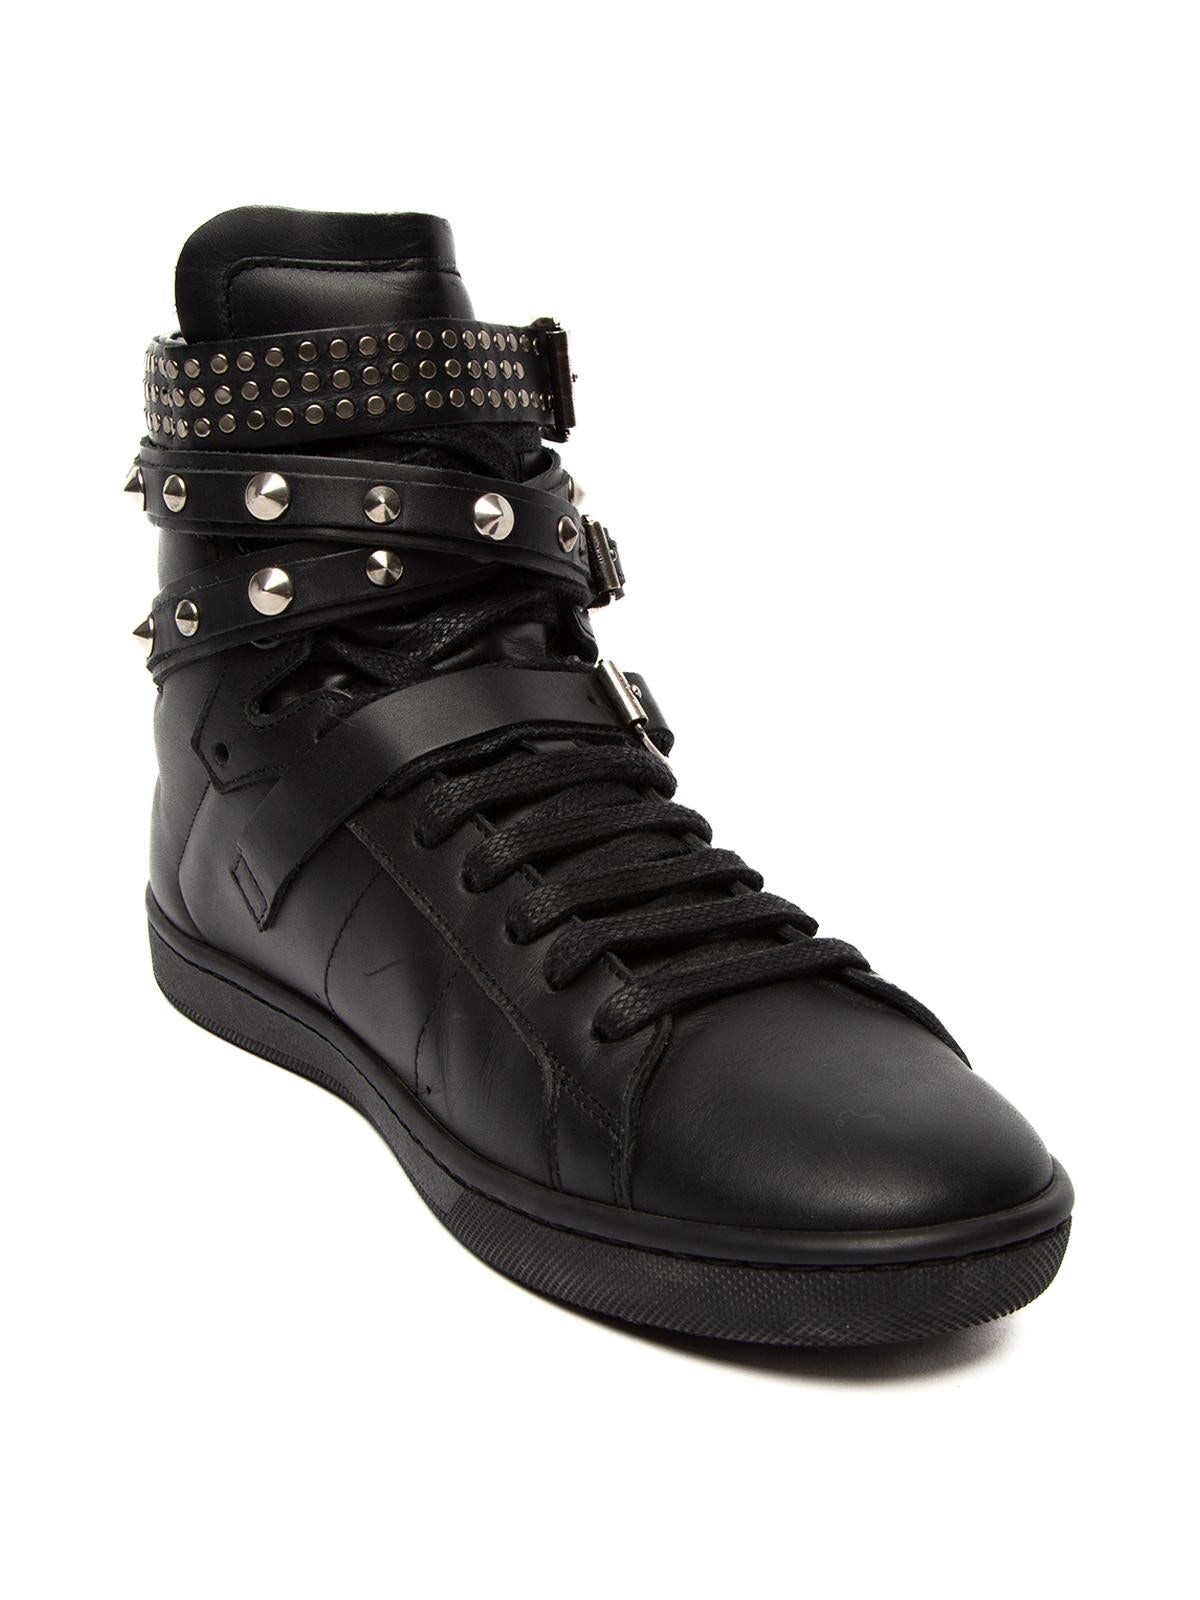 CONDITION is Very good. Minimal wear to sneakers and light wear to outsoles on this used Saint Laurent designer resale item. Details Colour - black Material - leather Toe style - round Silver metal stud embellishments Lace up and buckle fastenings